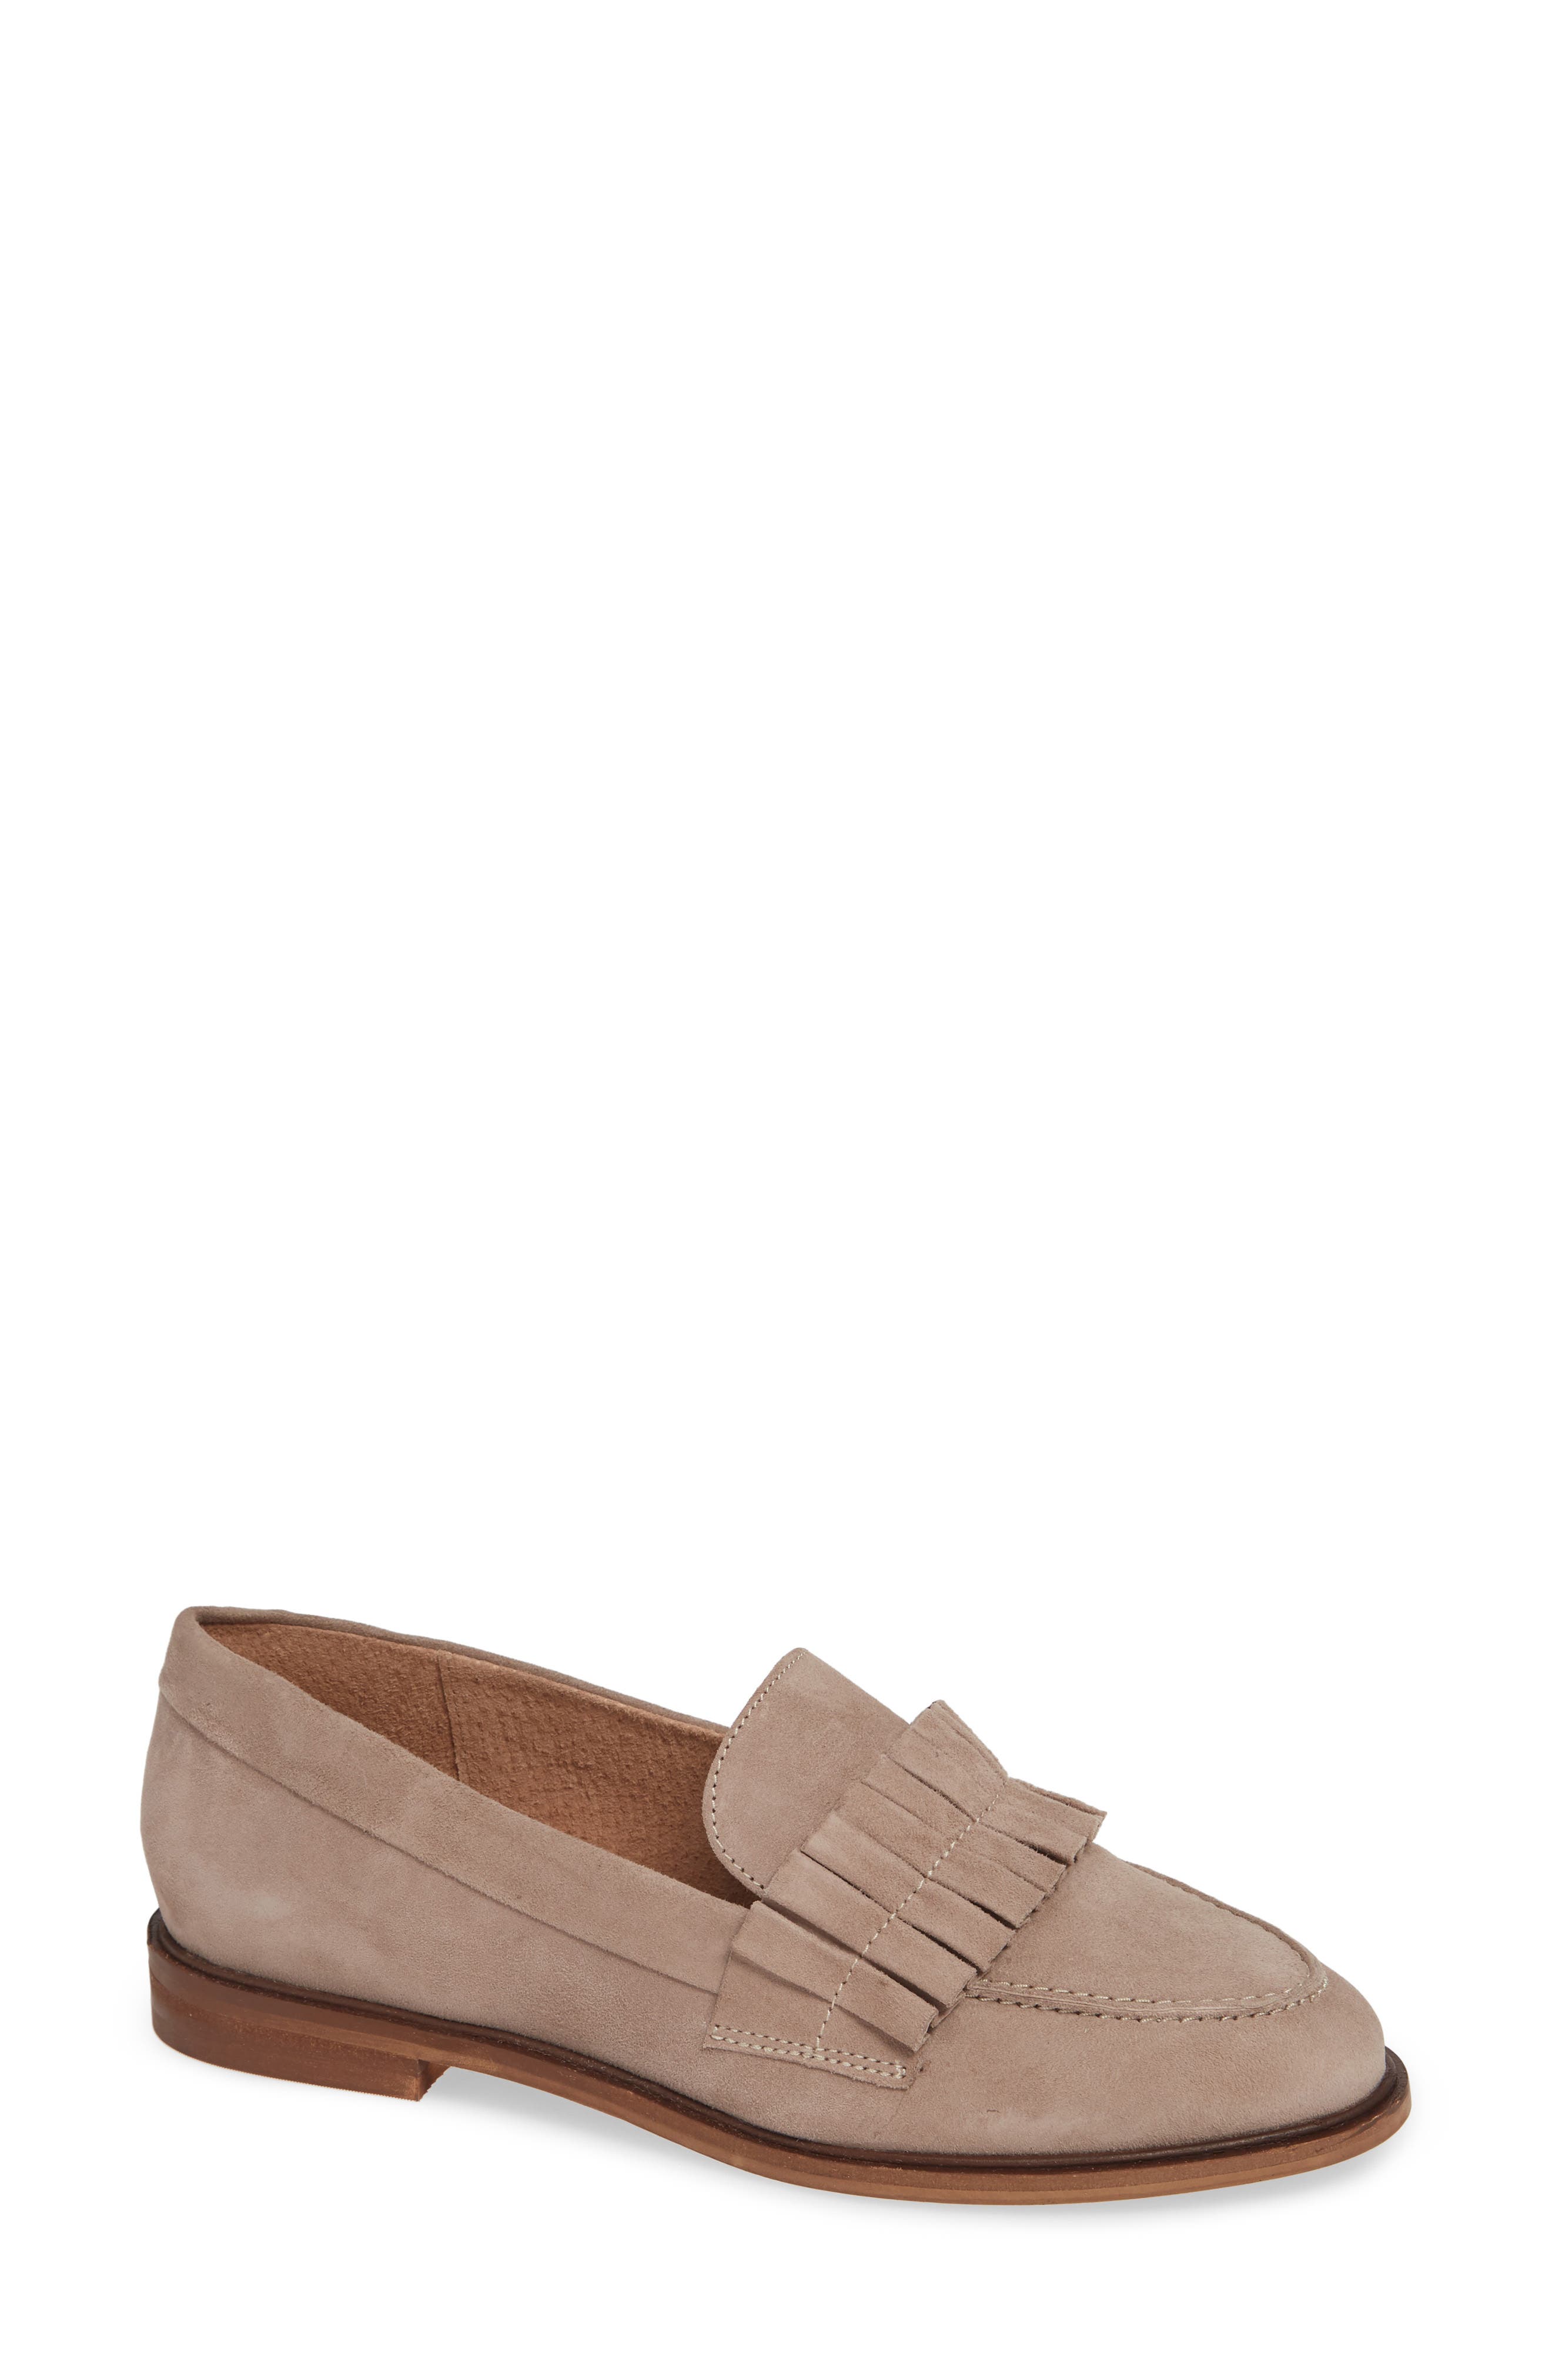 seychelles loafers